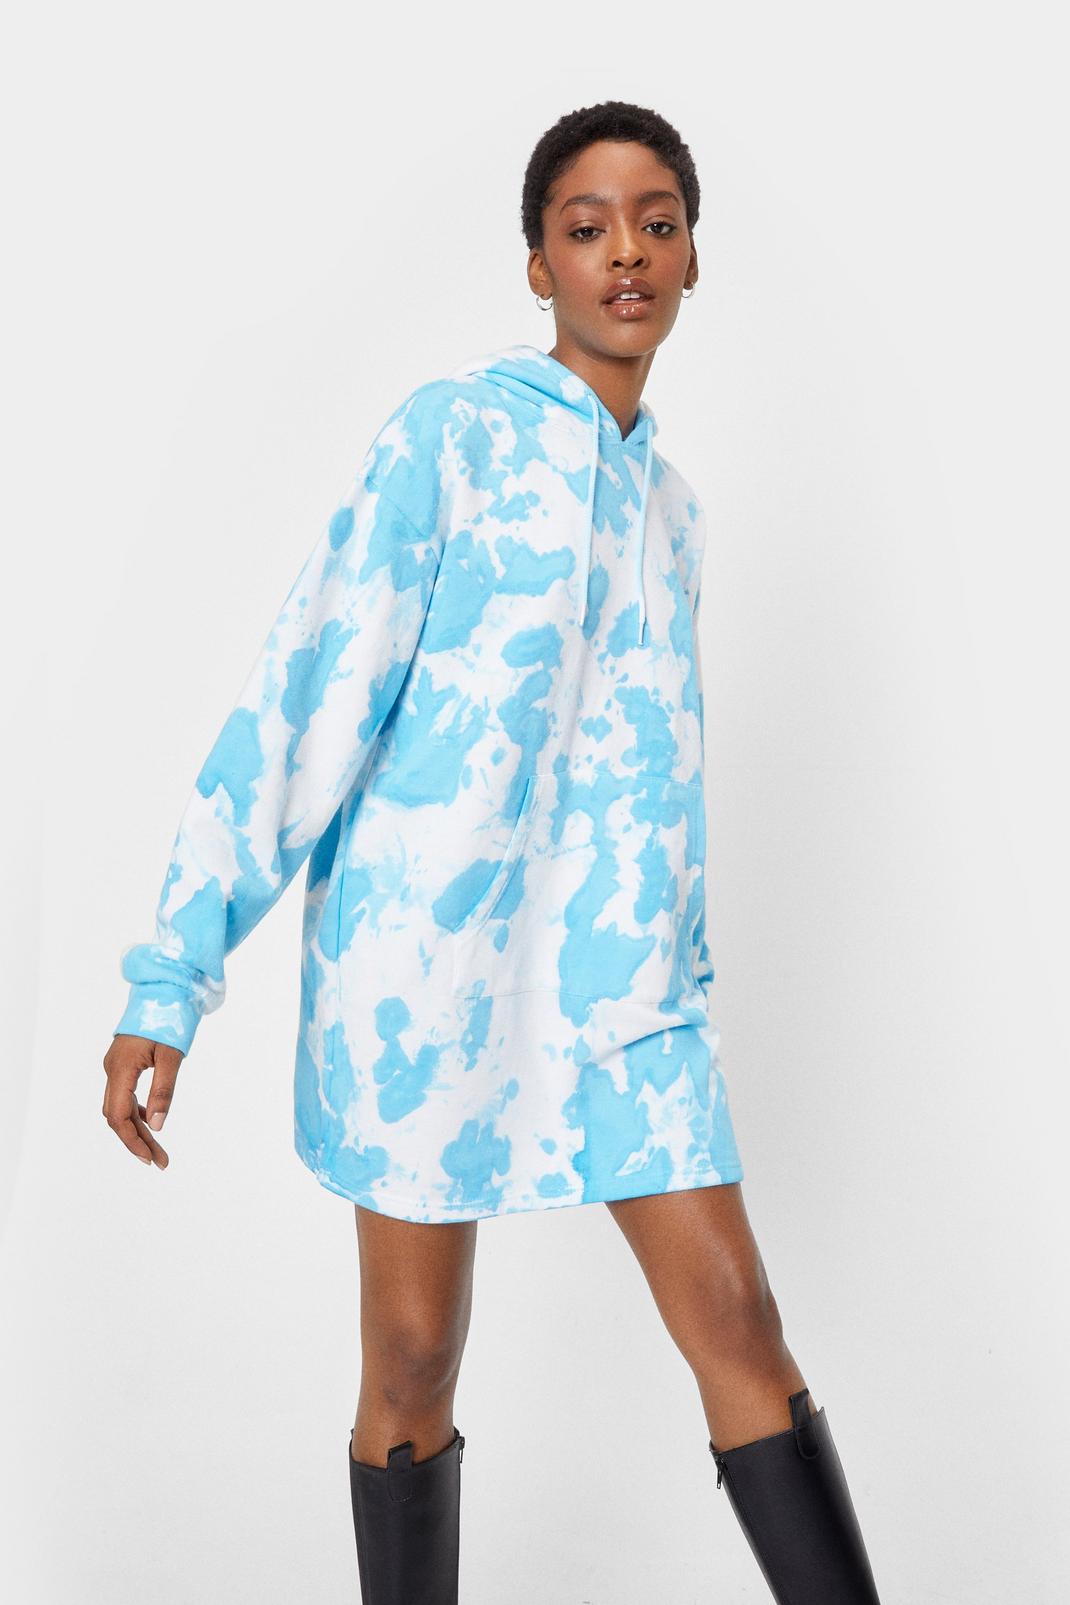 Baby blue When This is Over-sized Tie Dye Hoodie Dress image number 1